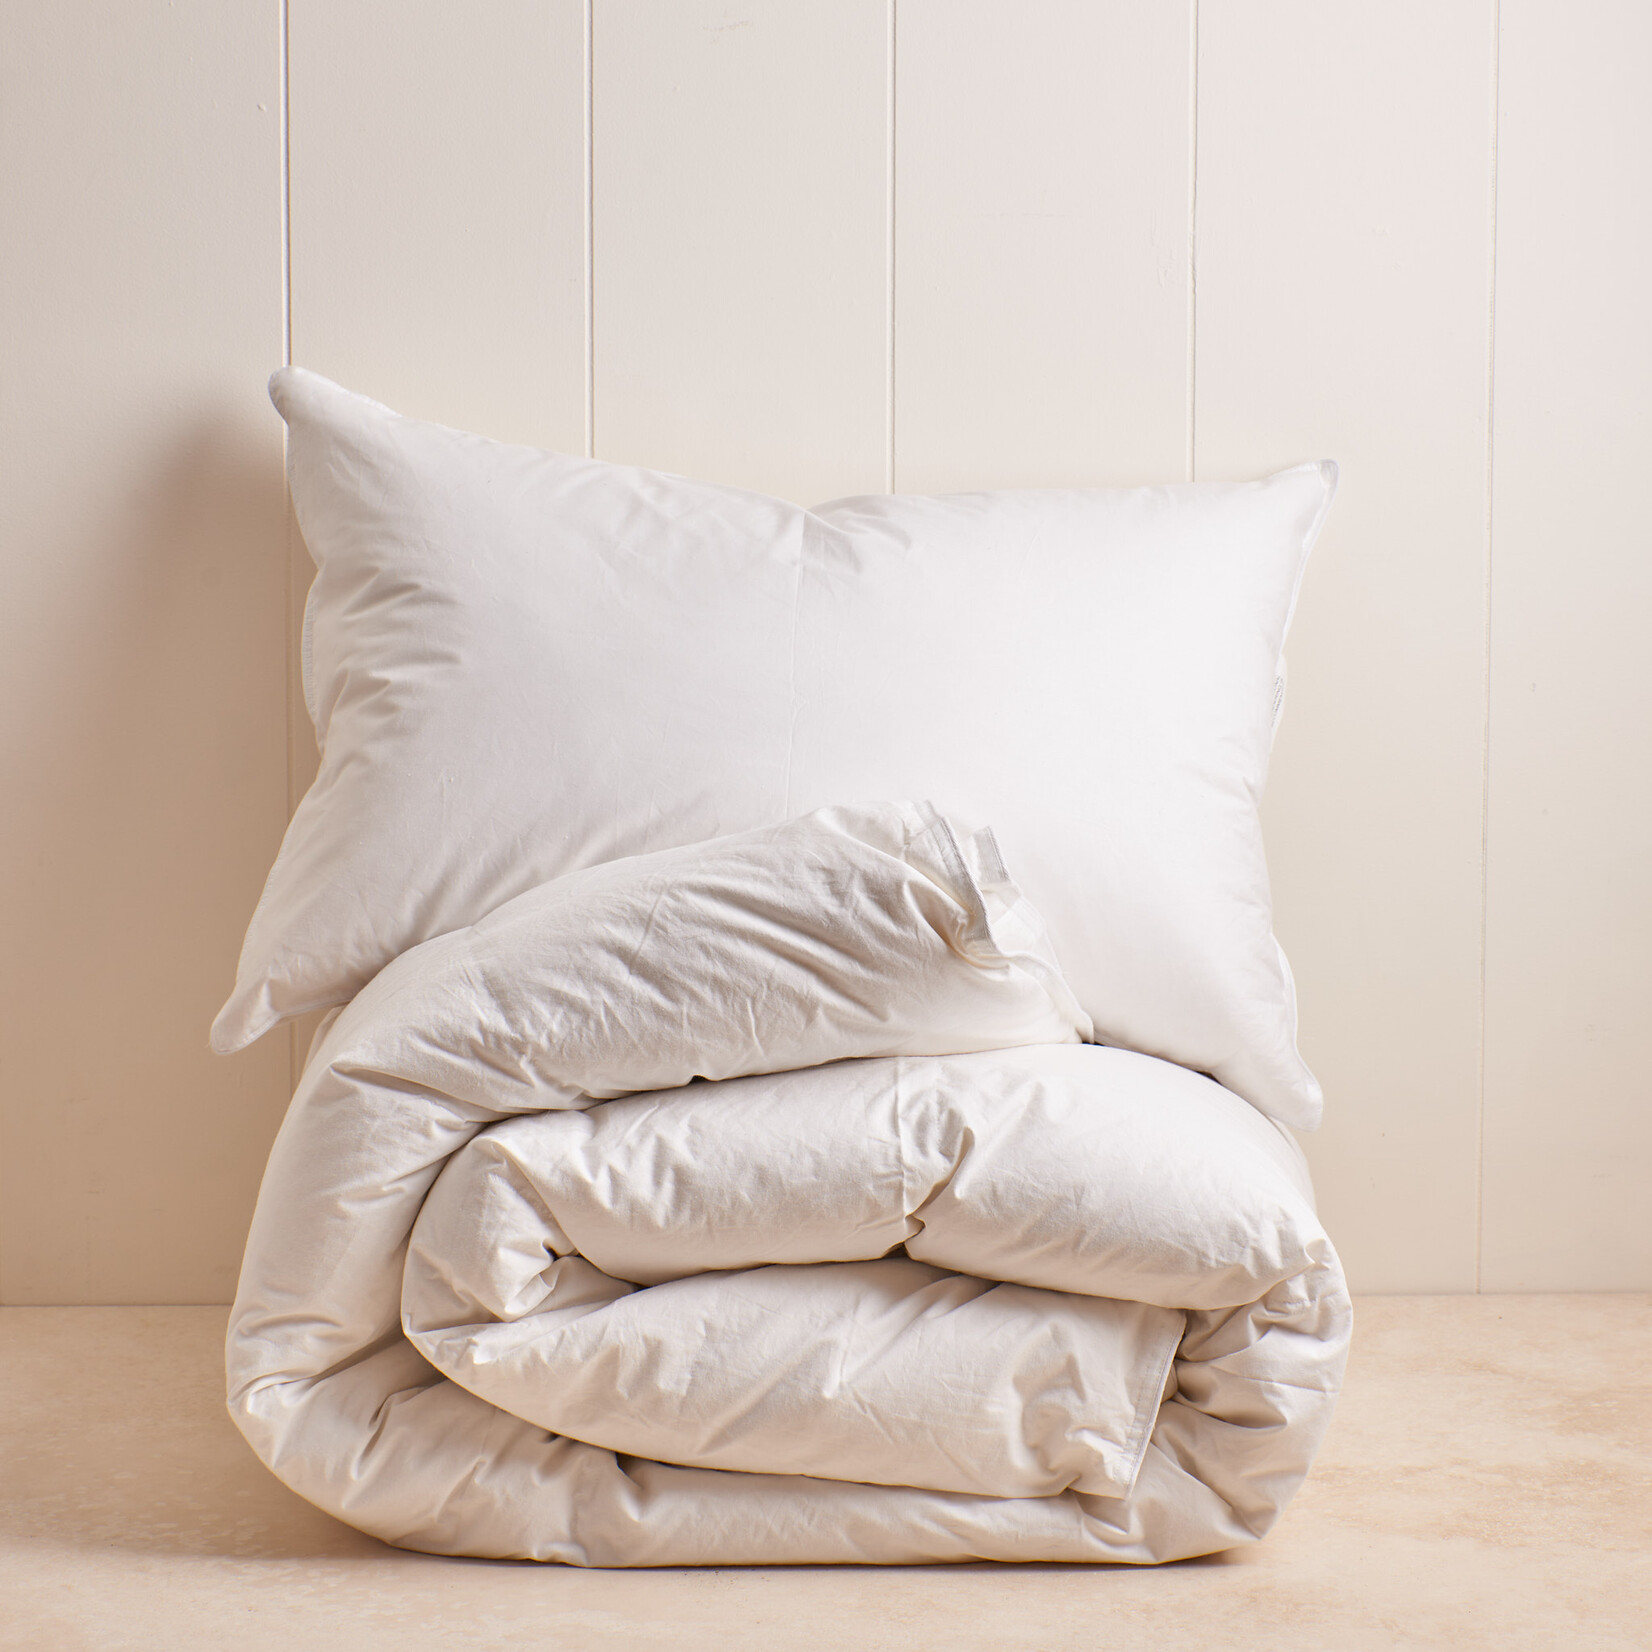 Feather and Down Sleeping Pillow - MED/FIRM